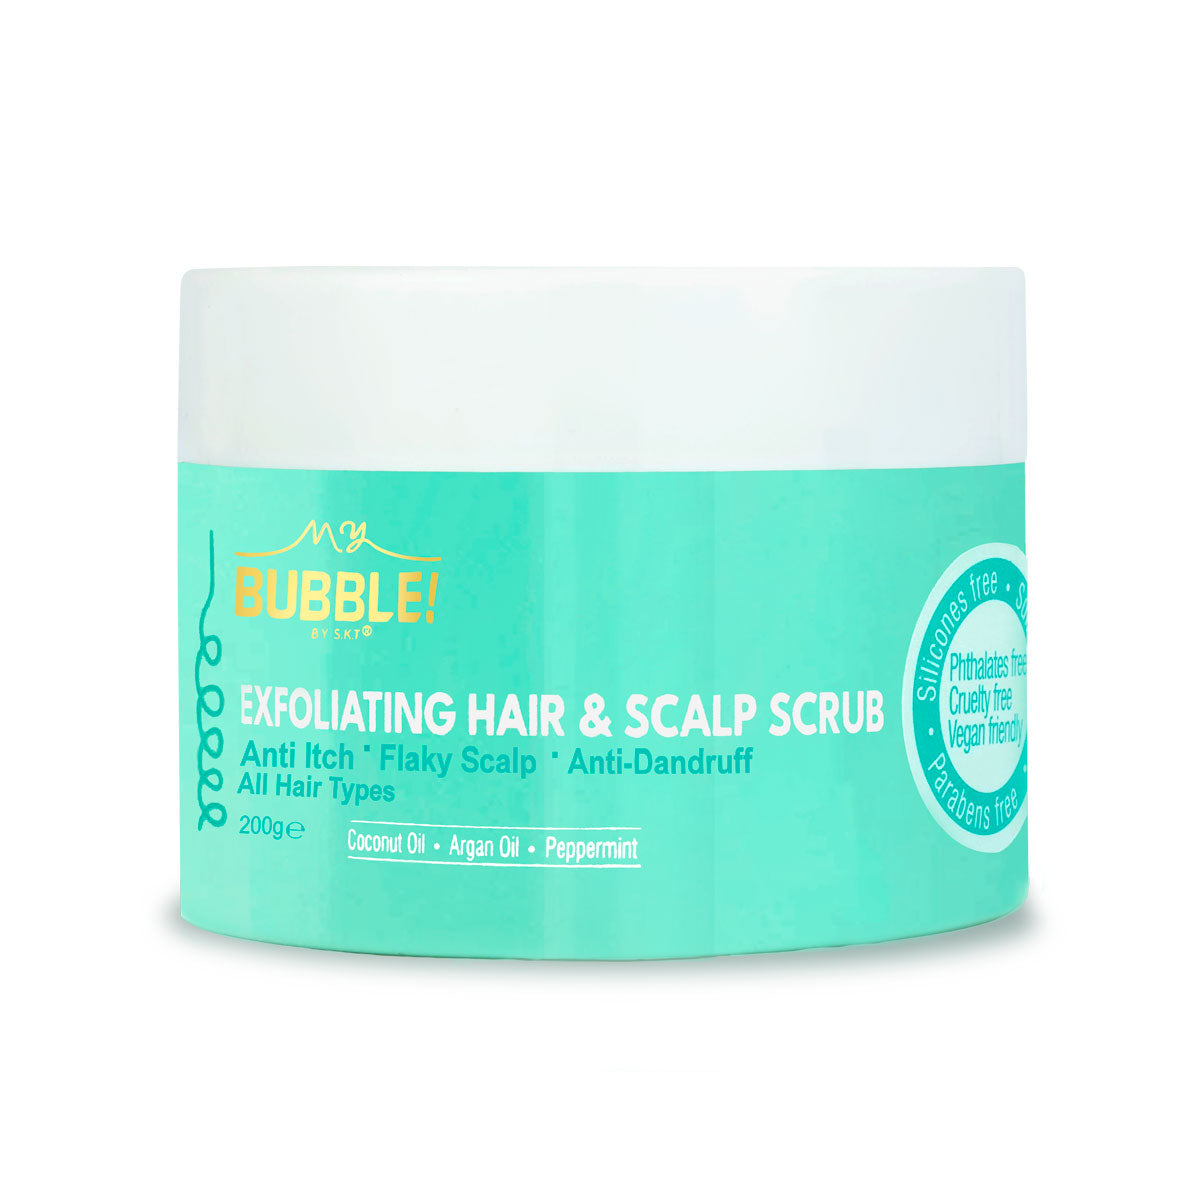 My Bubble! Exfoliating Hair and Scalp Scrub 200g